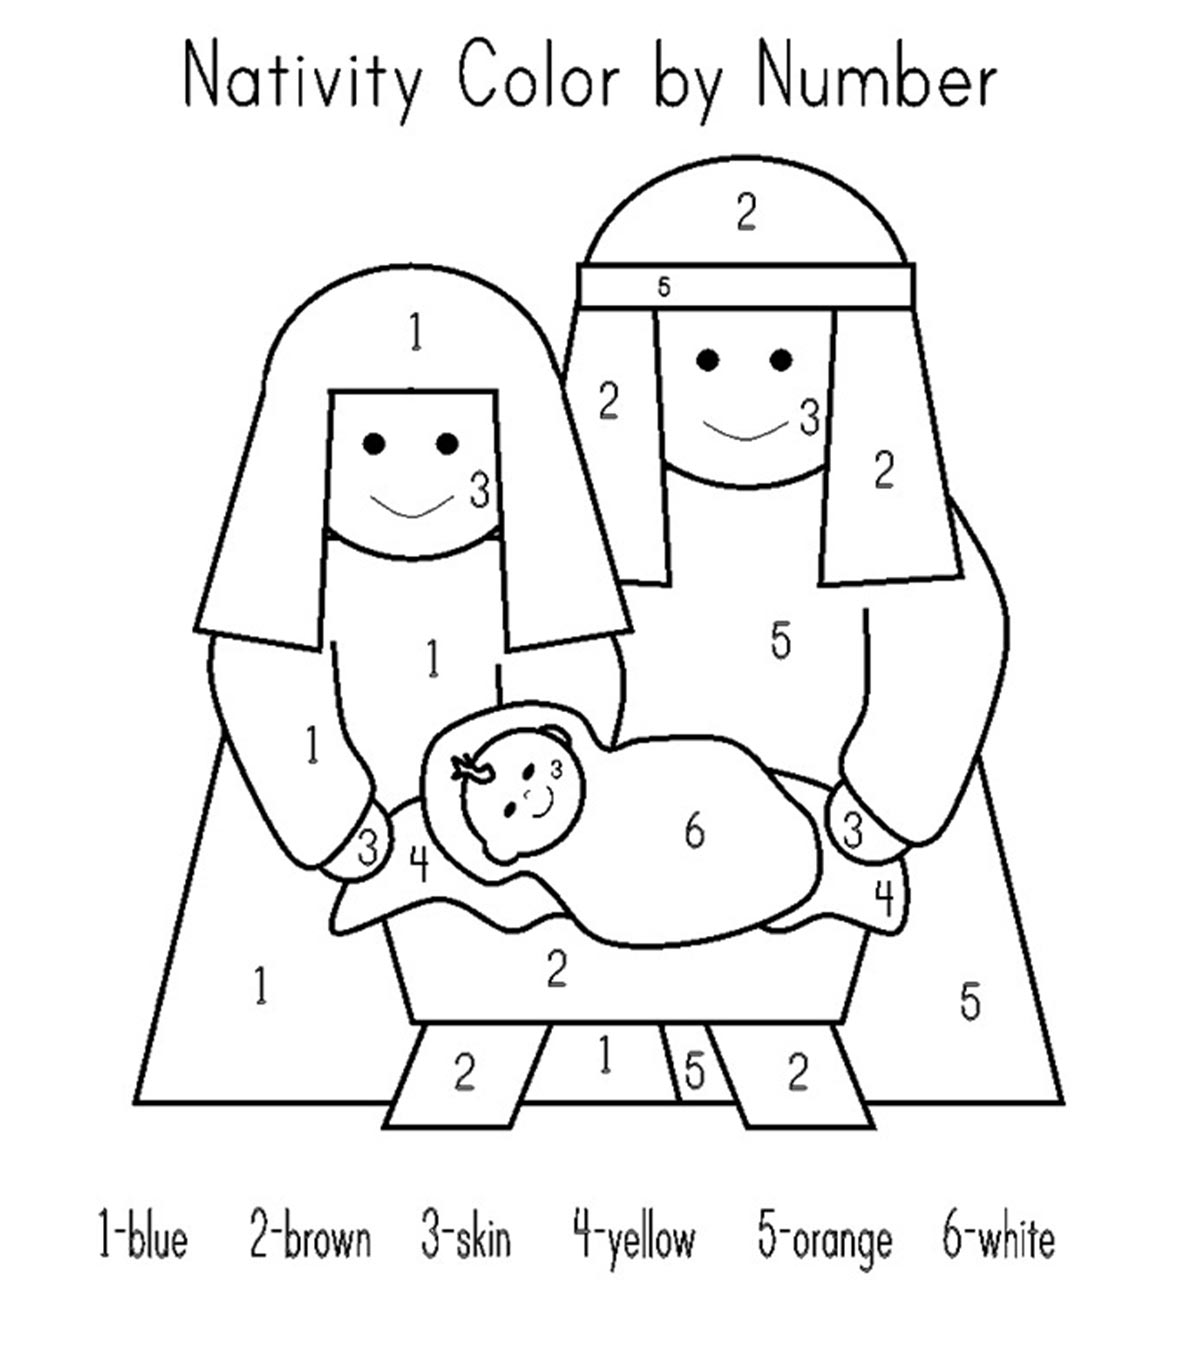 Nativity Coloring Pages For Your Toddlers